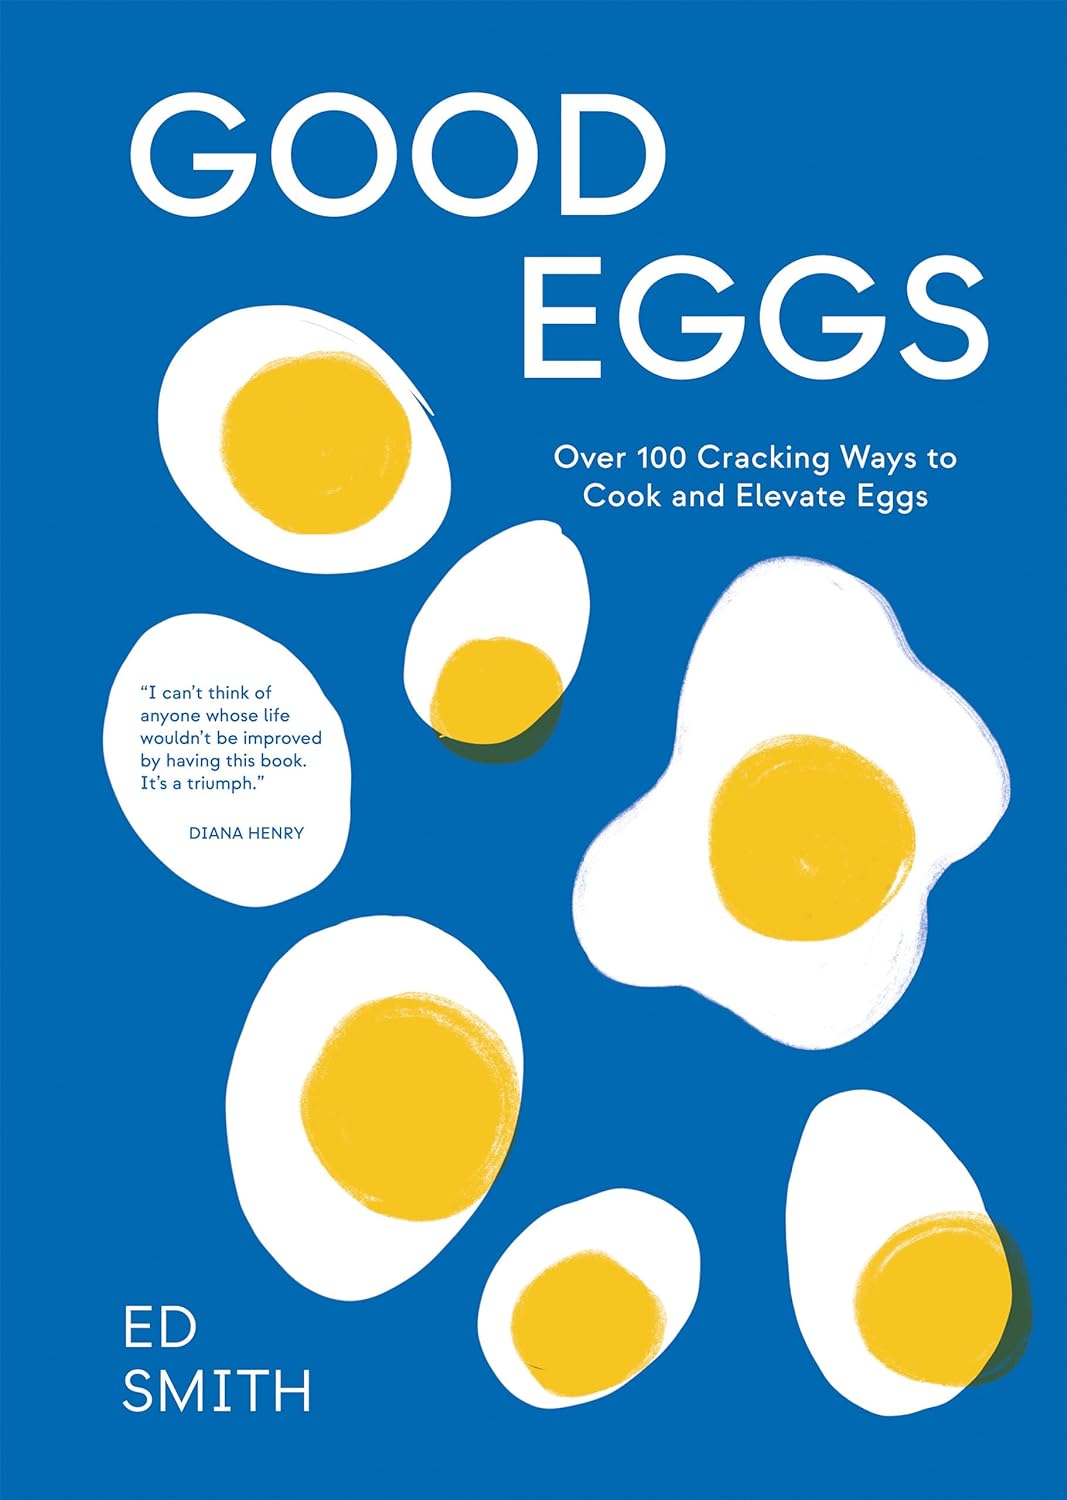 Good Eggs: Over 100 Cracking Ways to Cook and Elevate Eggs (Ed Smith)